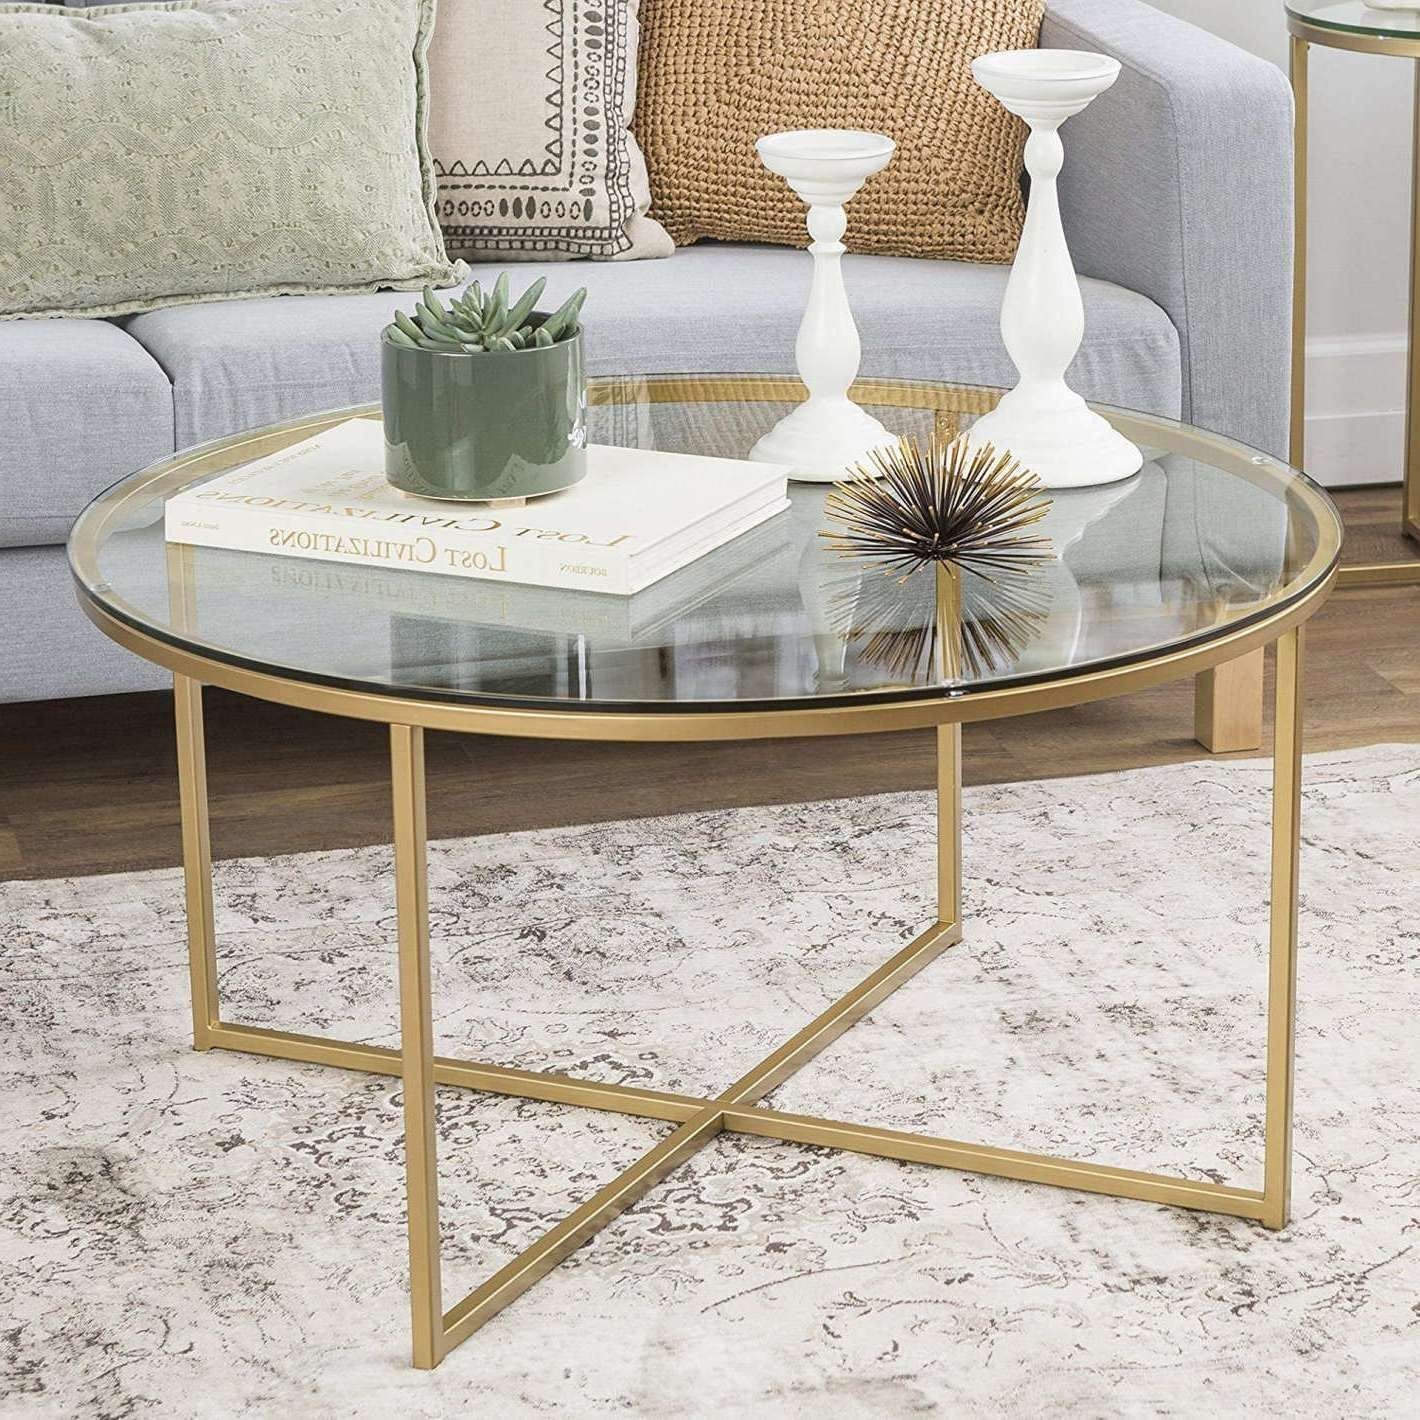 The Best Glass Coffee Tables Under $200 With Well Known Glass Coffee Tables (View 1 of 20)